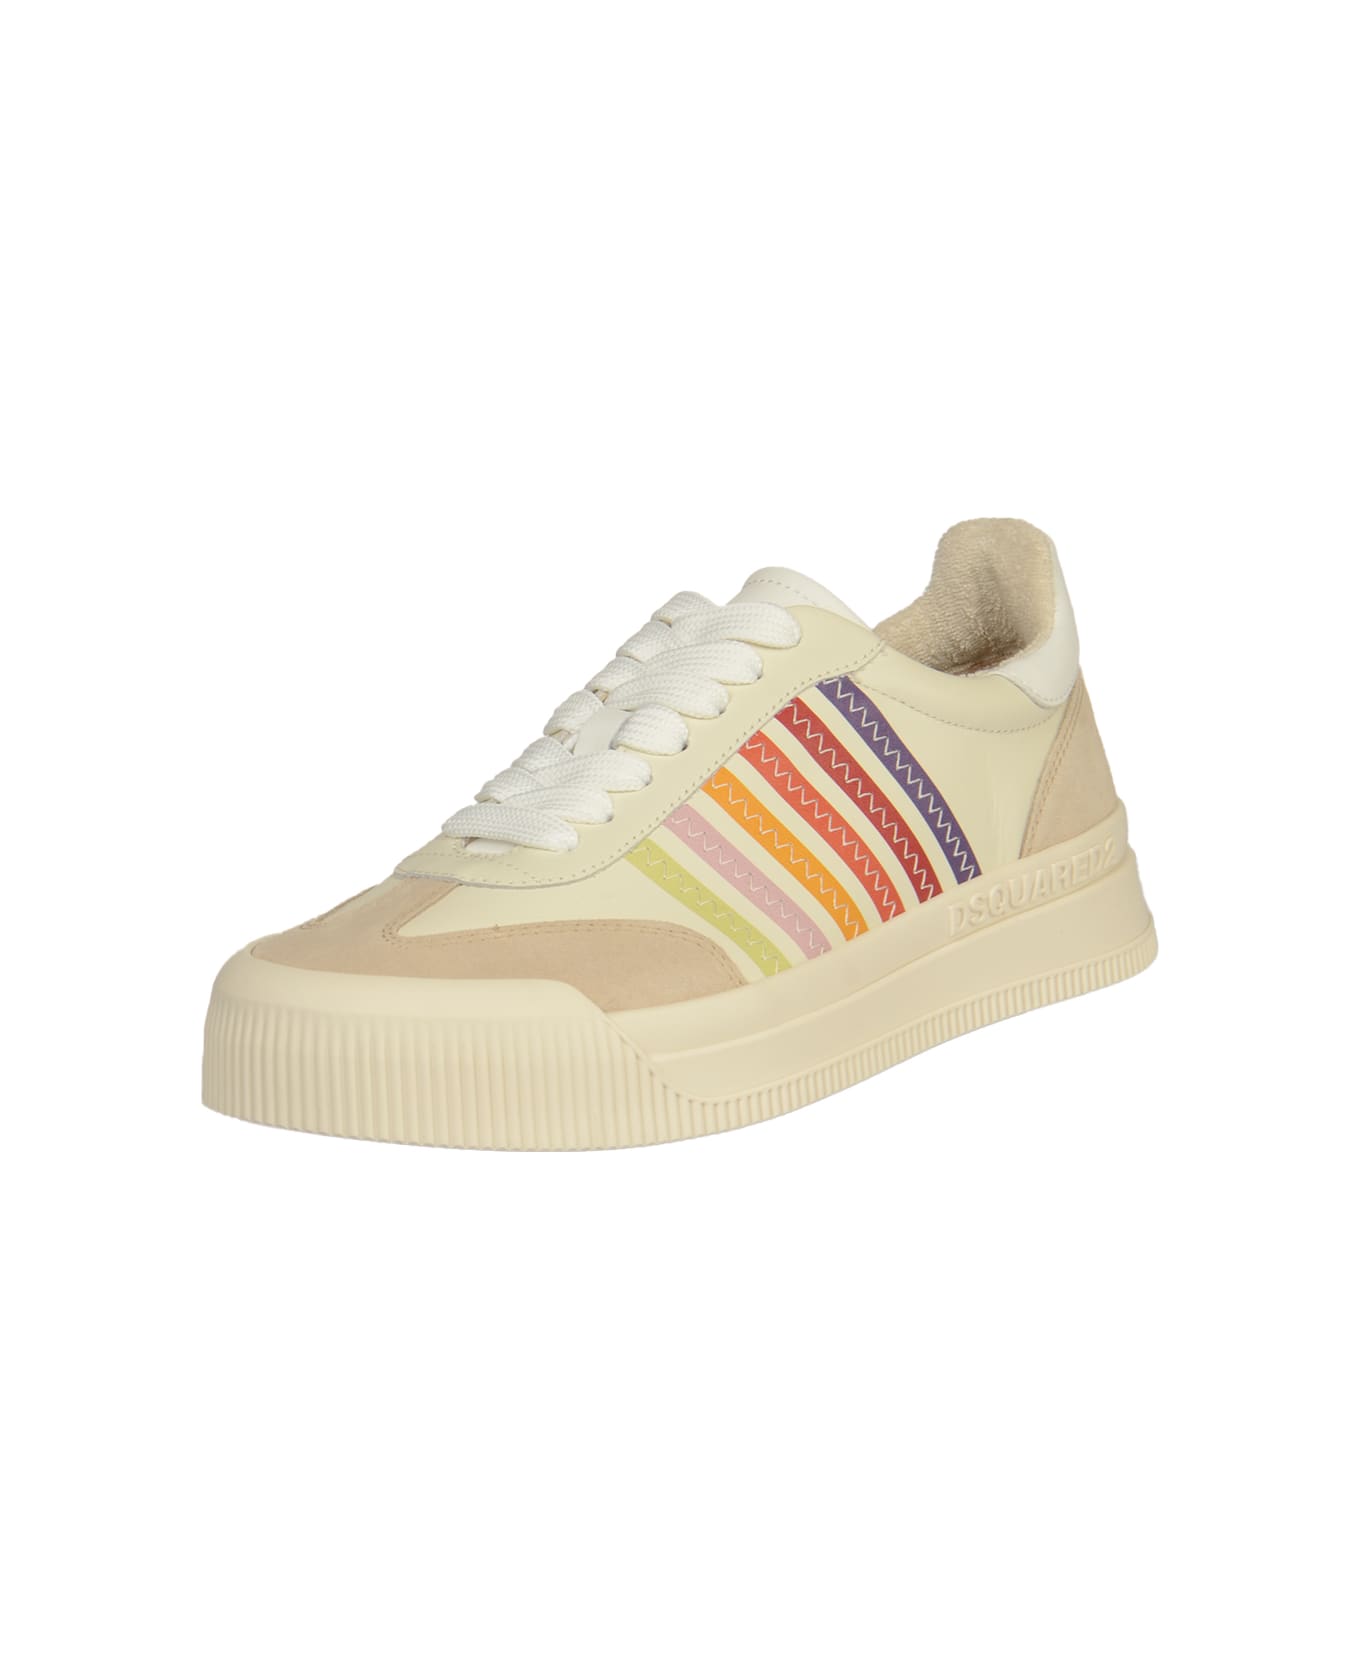 Dsquared2 New Jersey Sneakers - Beige/Multicolor スニーカー